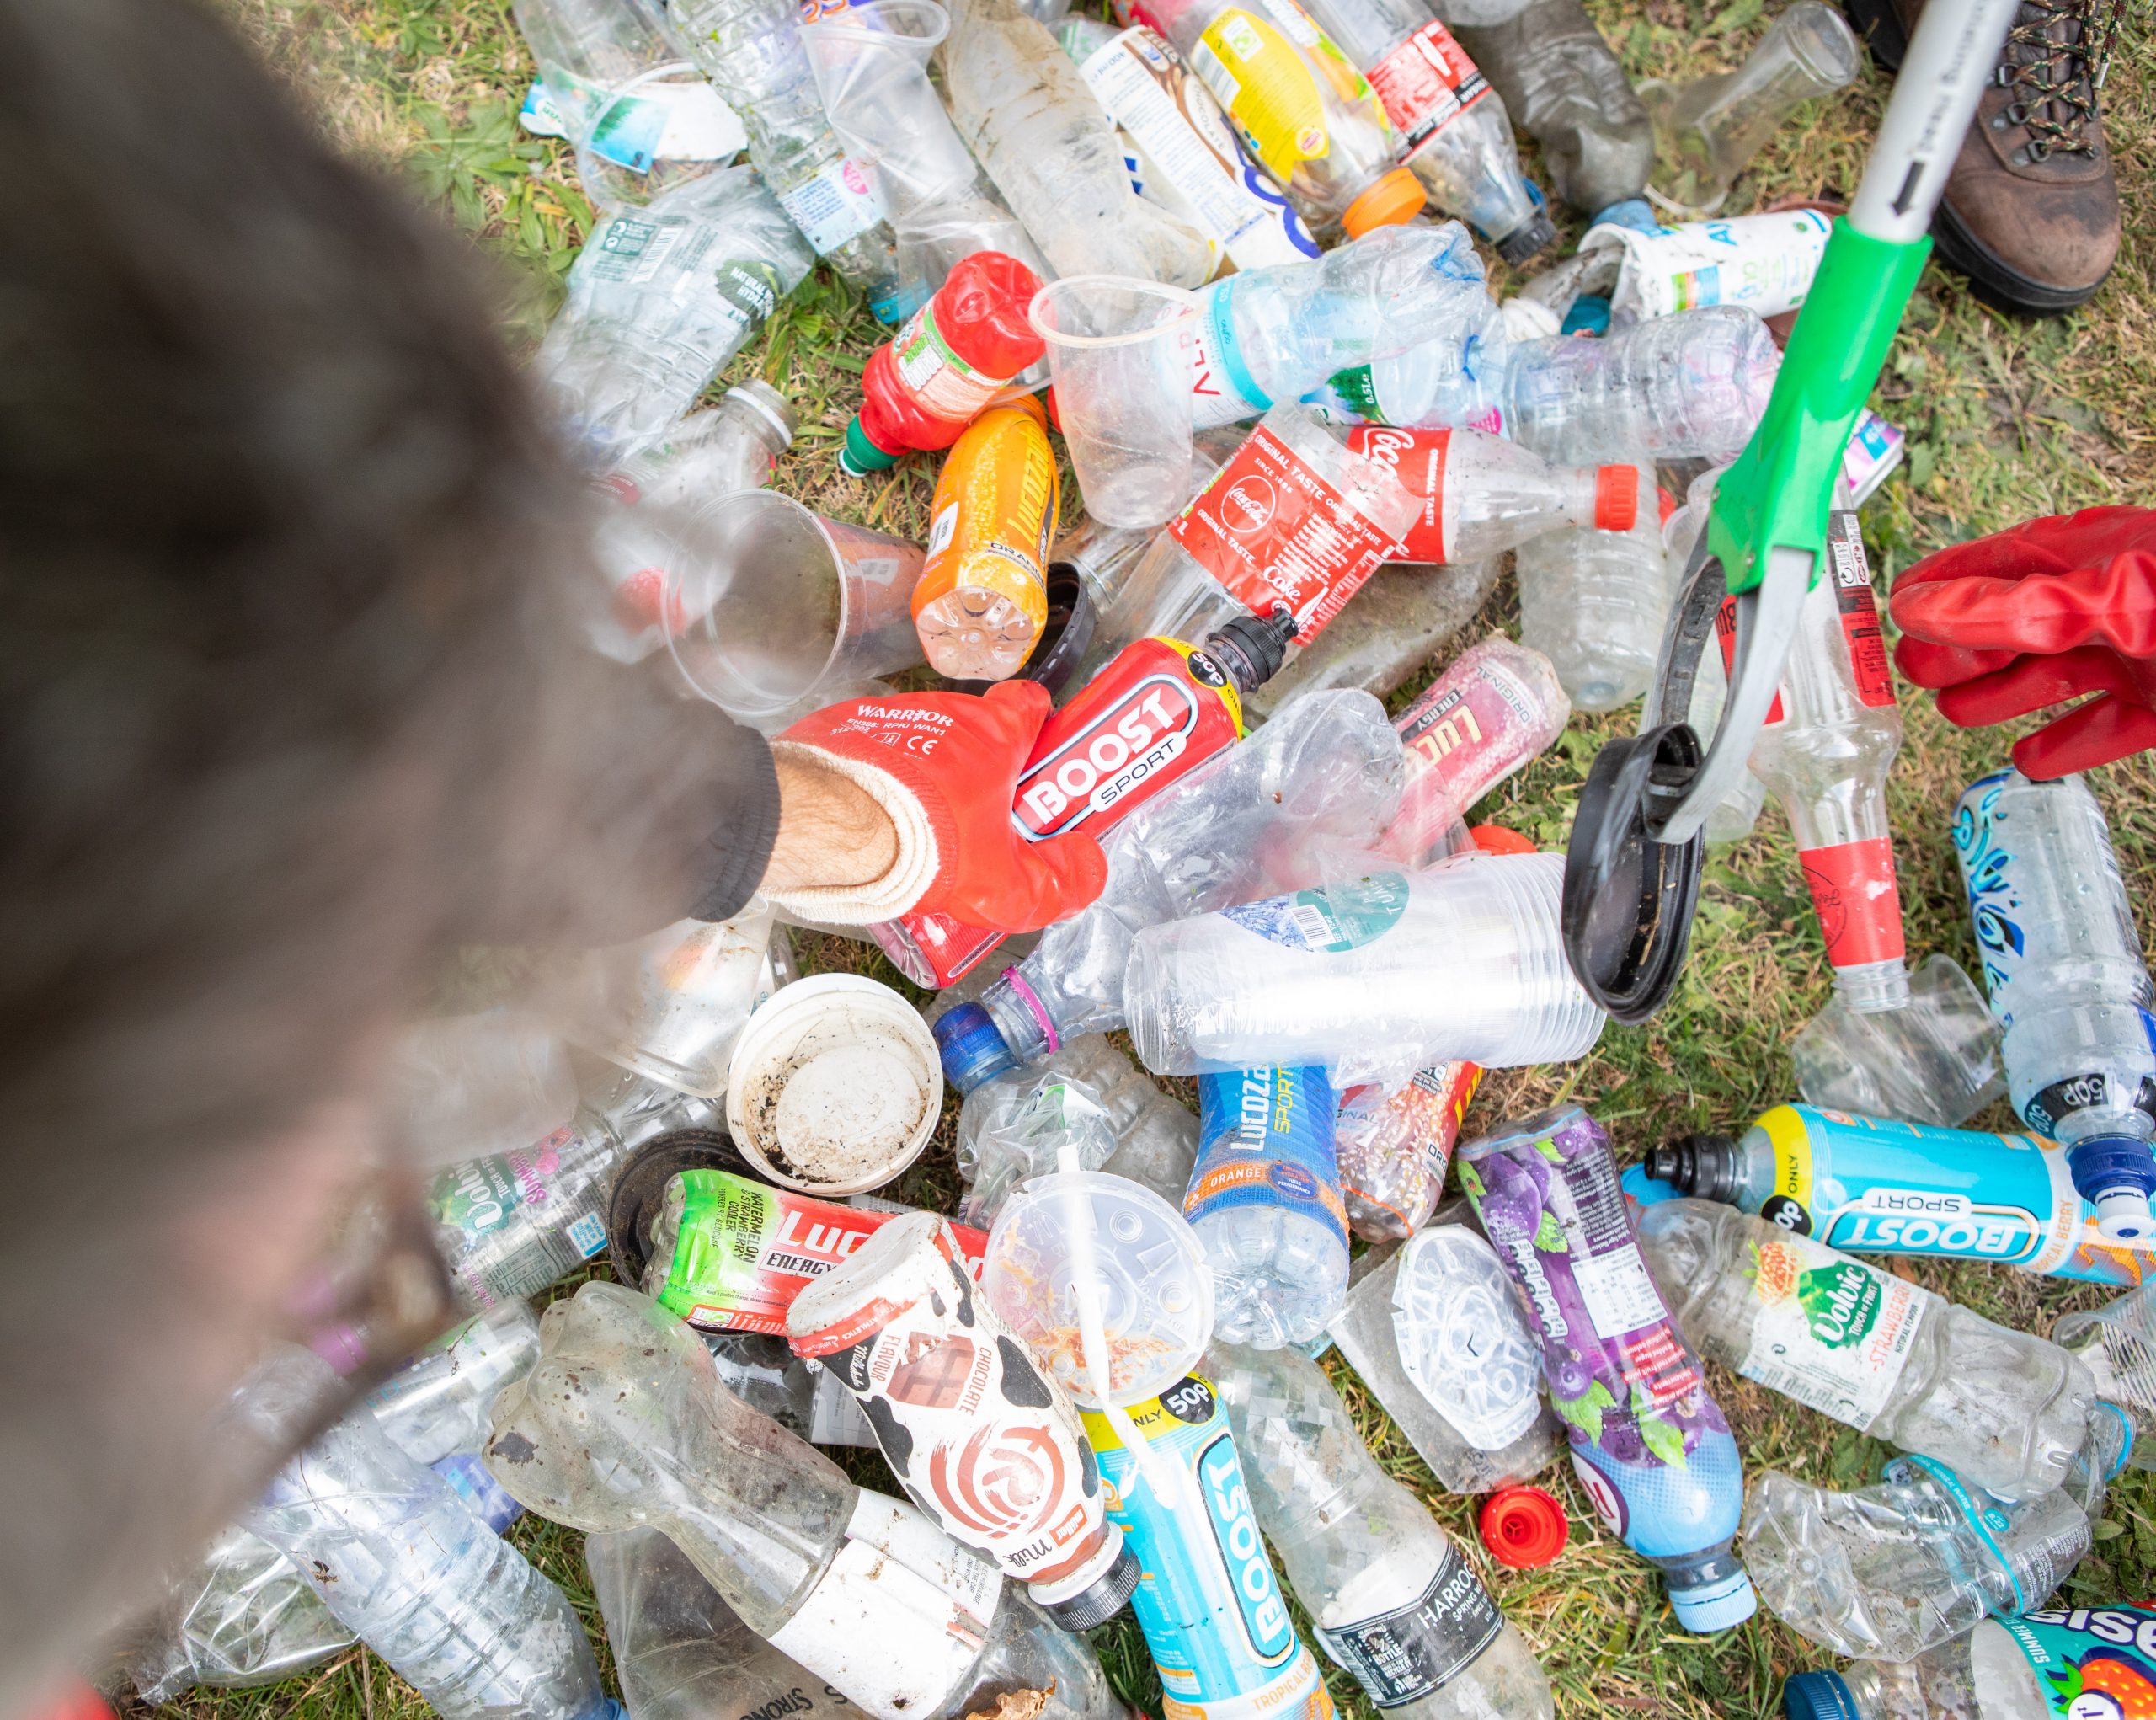 Close up of bottles and litter and cans with hand picking up a bottle